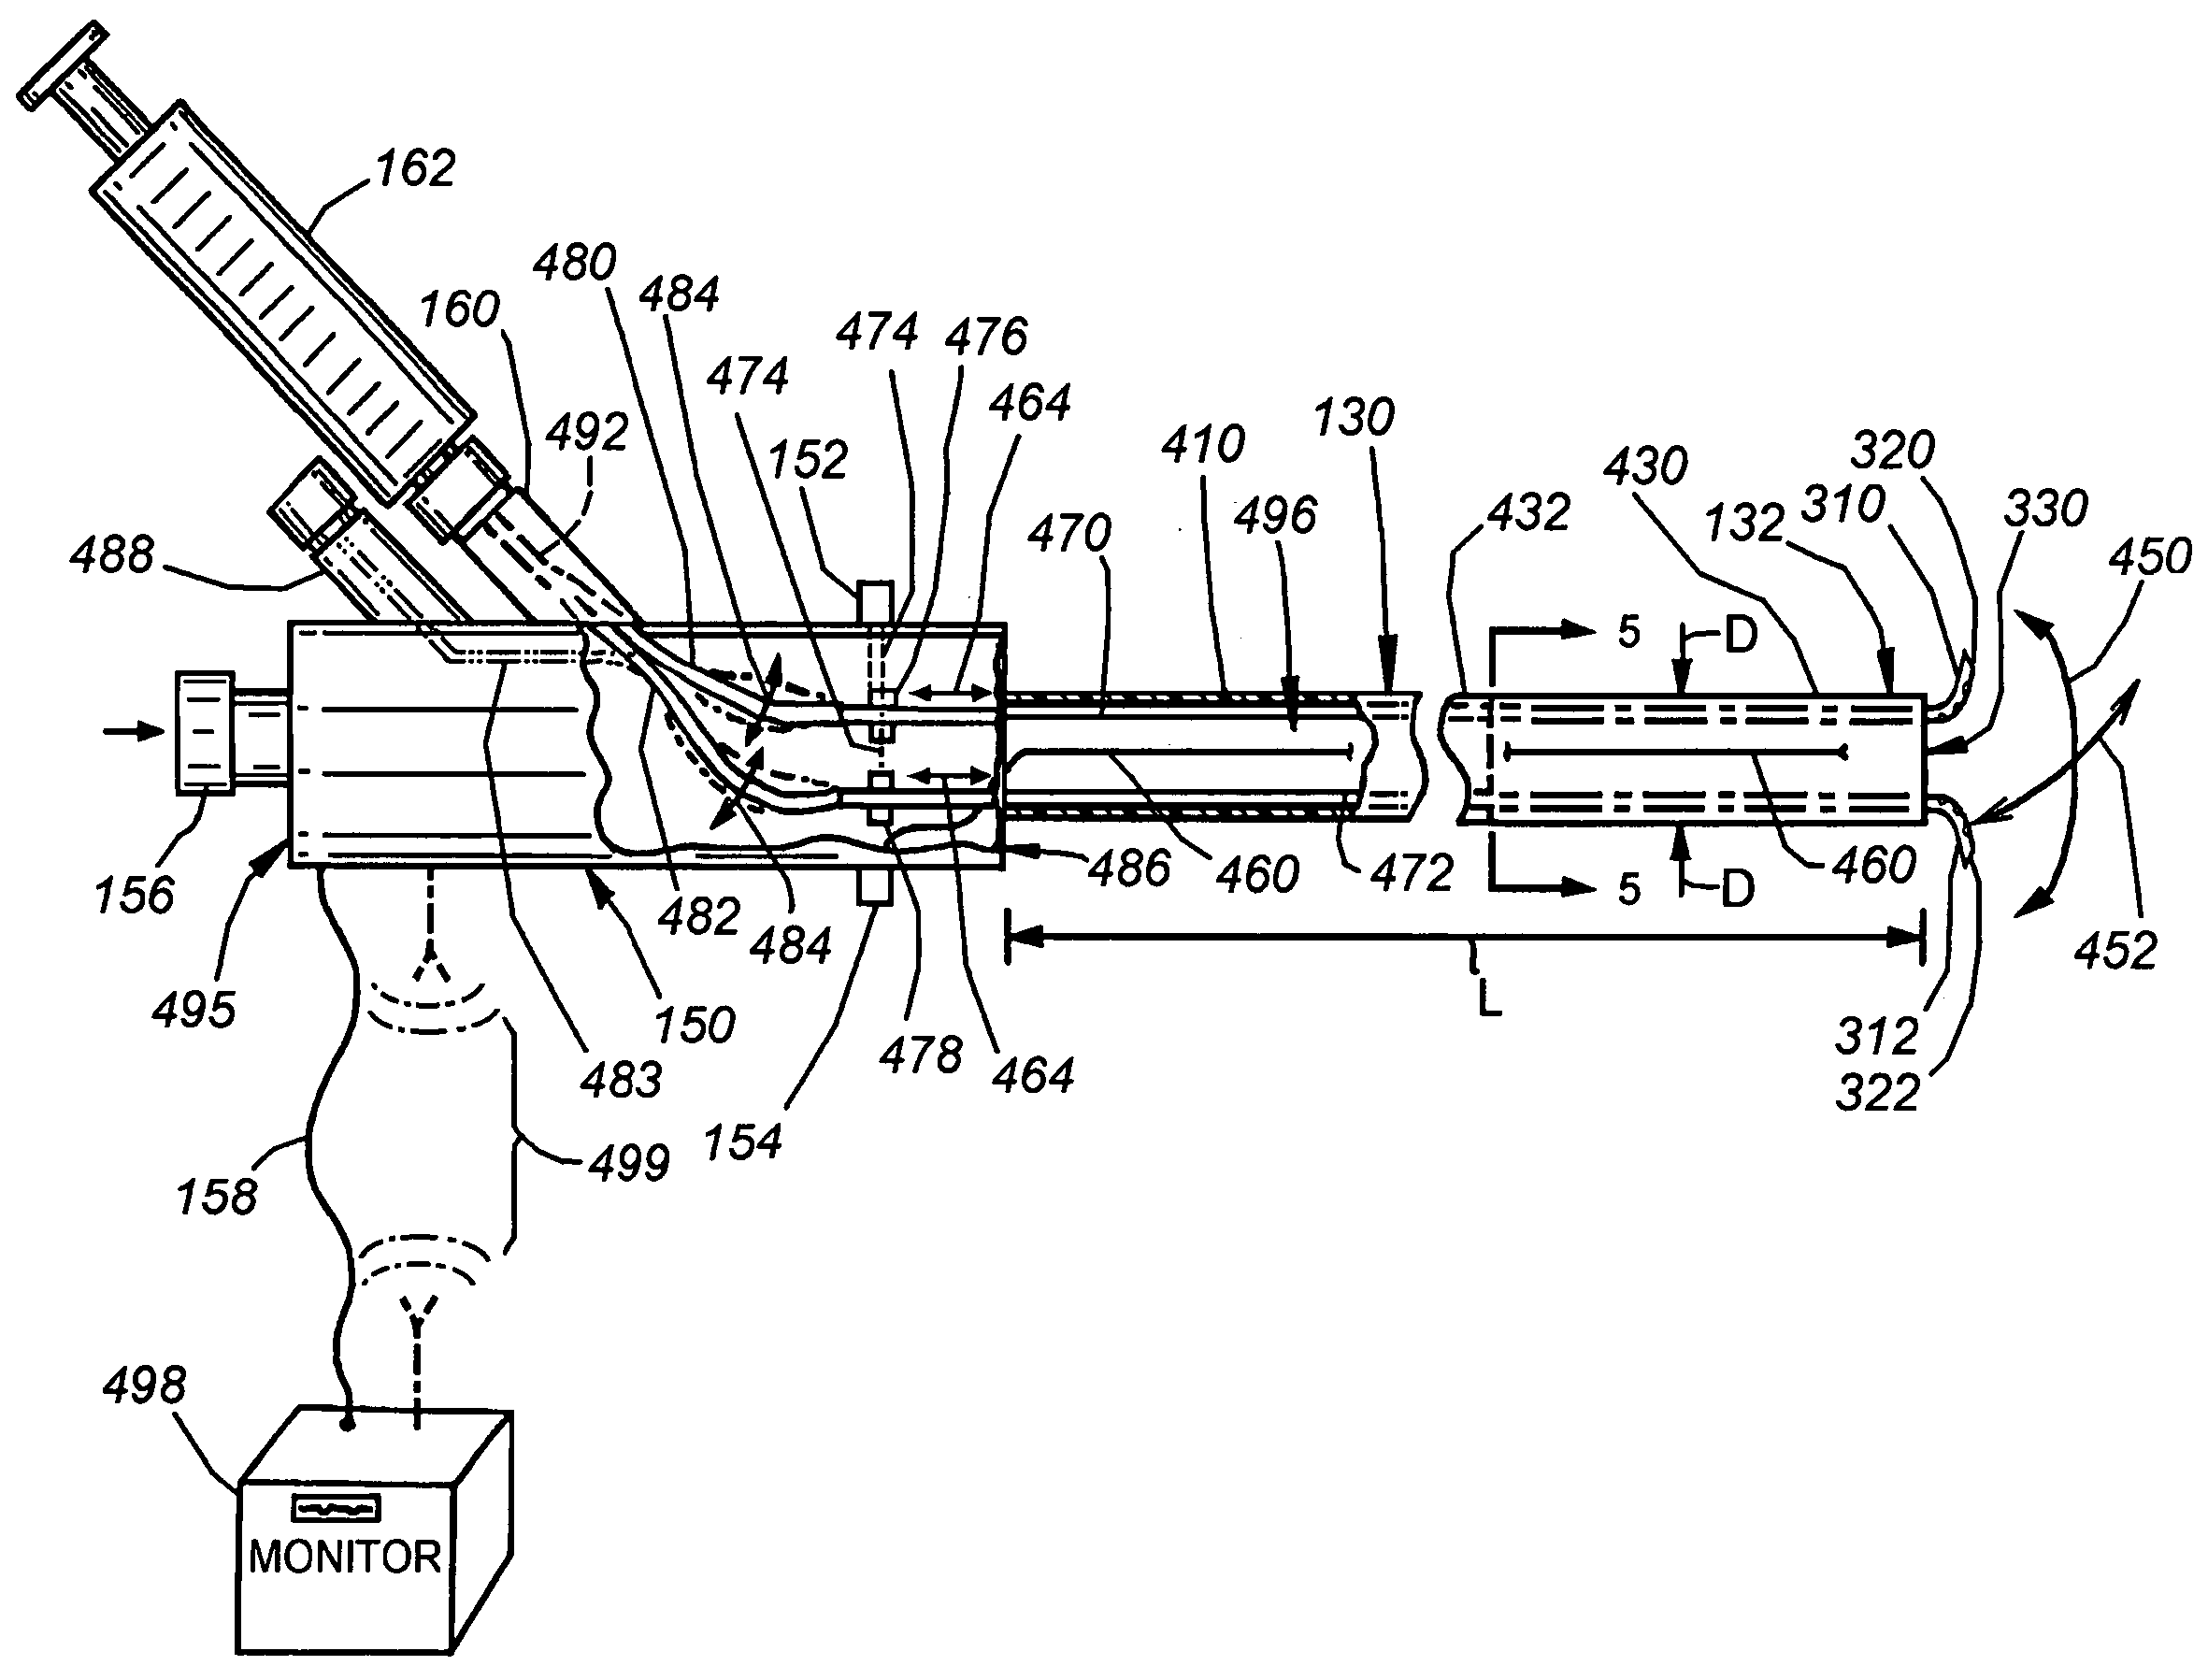 Catheter for introduction of medications to the tissues of a heart or other organ